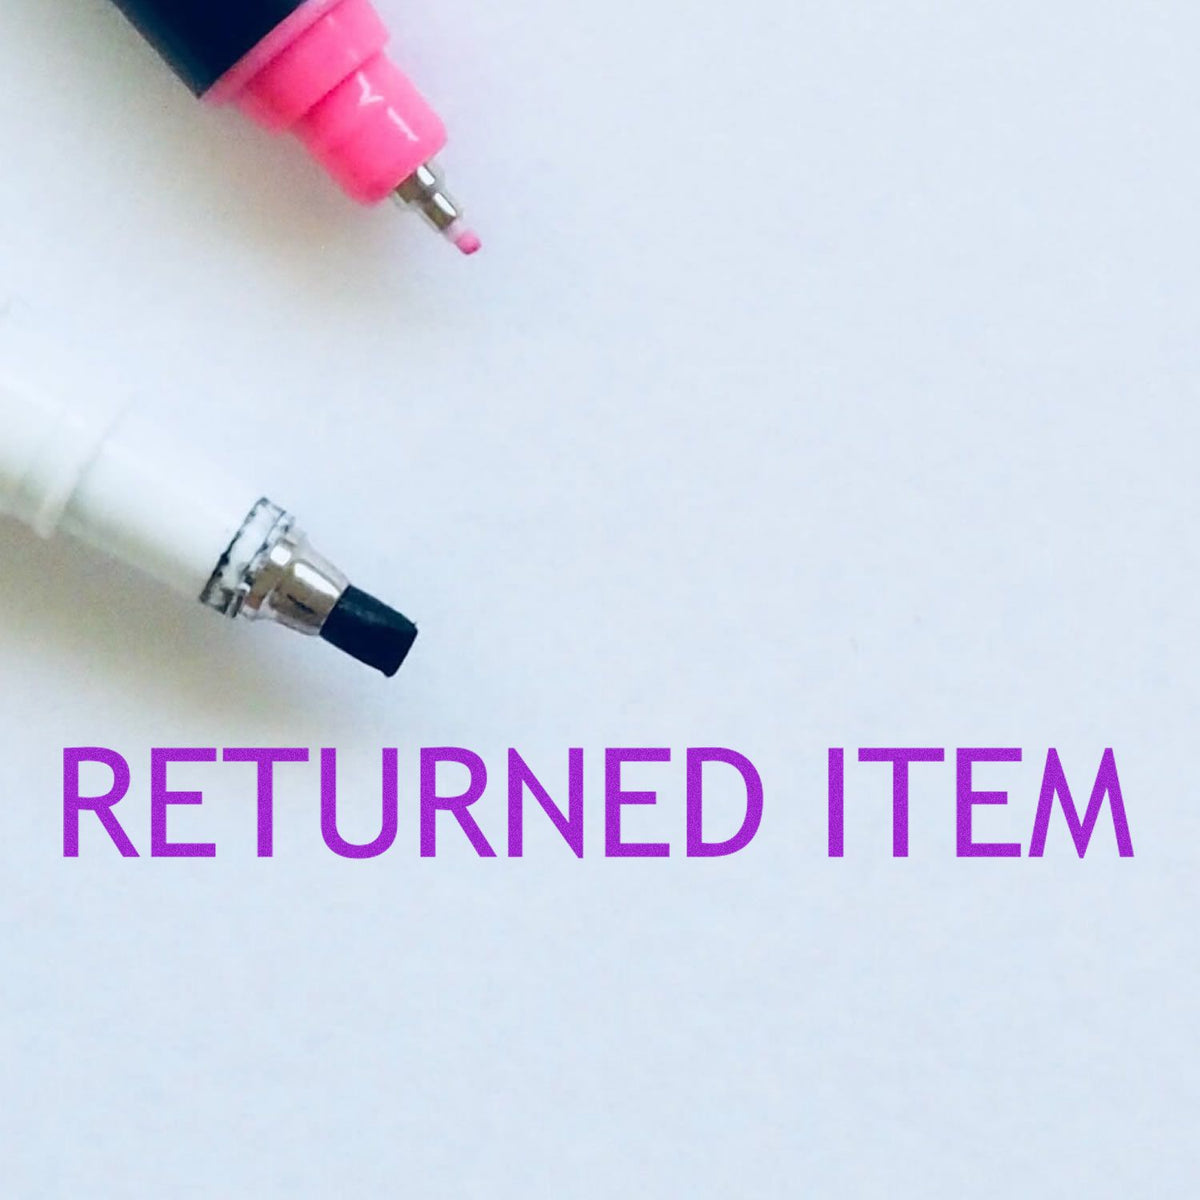 Self Inking Returned Item Stamp In Use